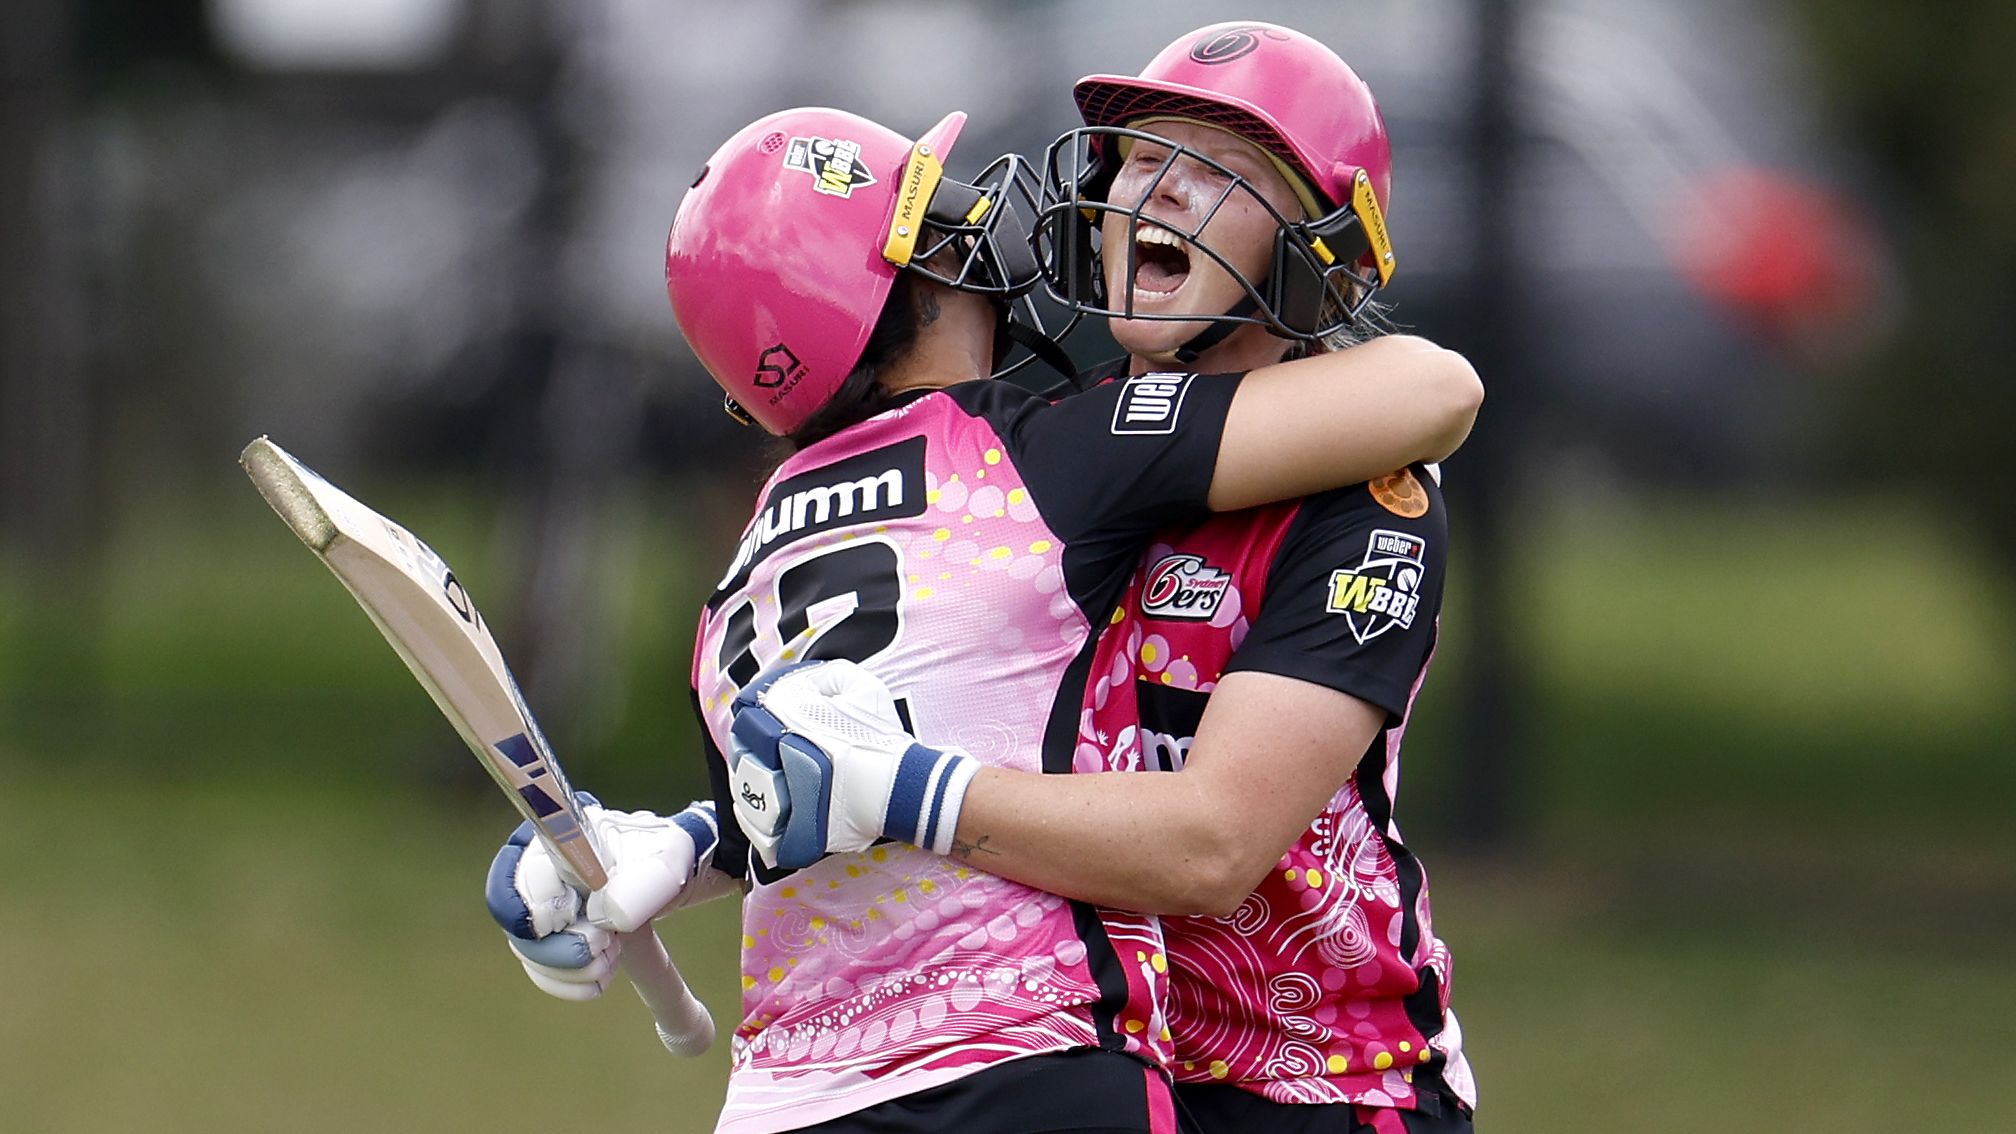 Alyssa Healy of the Sixers celebrates her winning run against the Scorchers. (Photo by Jonathan DiMaggio/Getty Images)